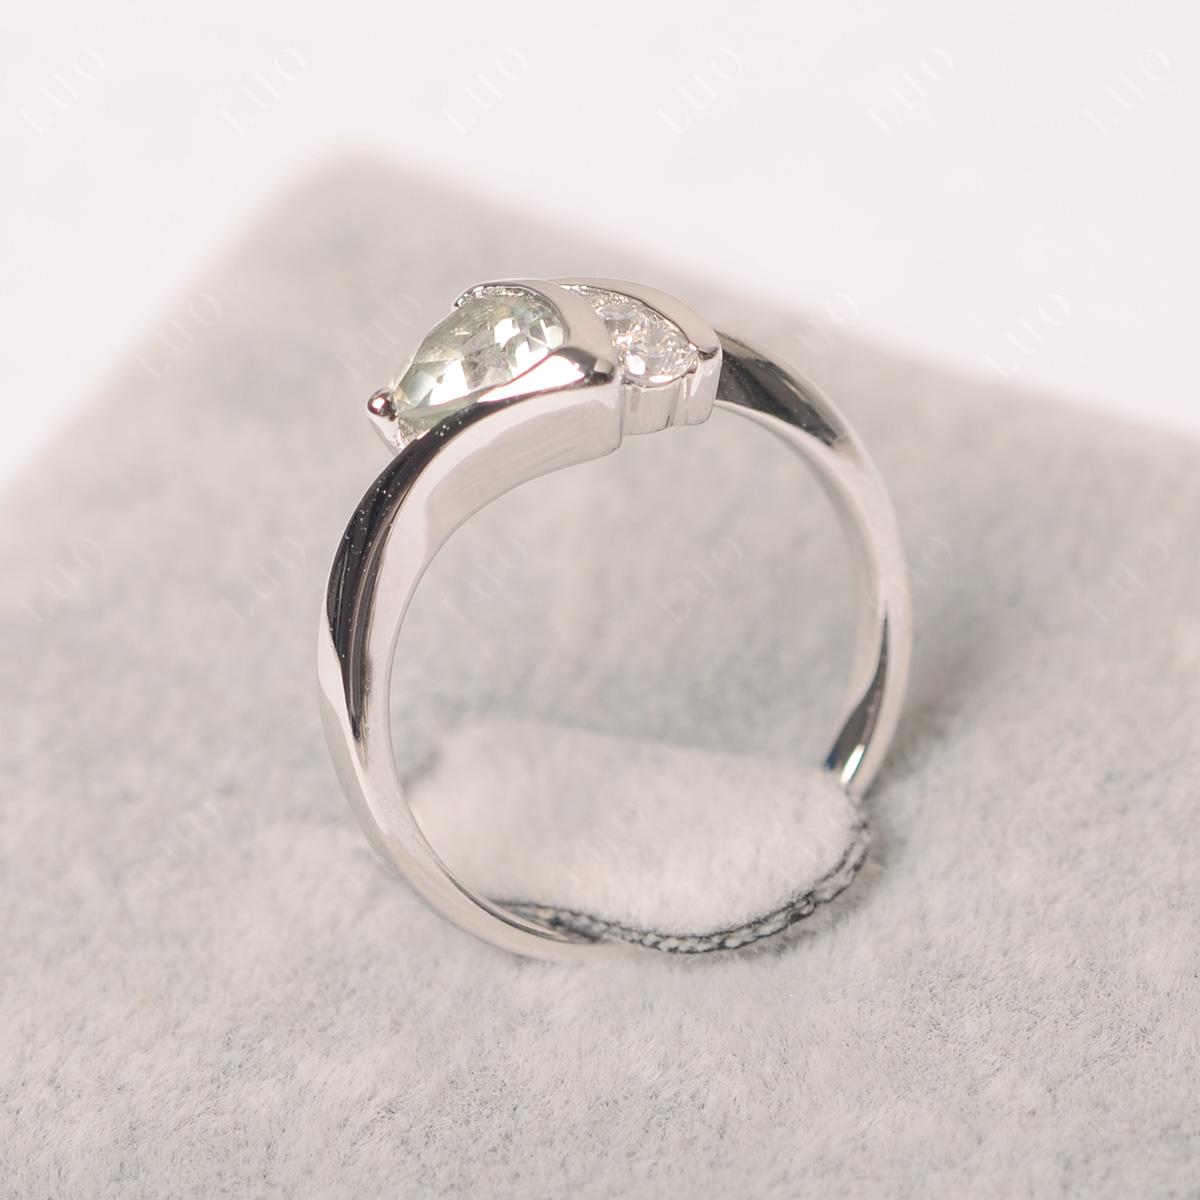 Trillion Cut Green Amethyst Sailboat Inspire Ring - LUO Jewelry